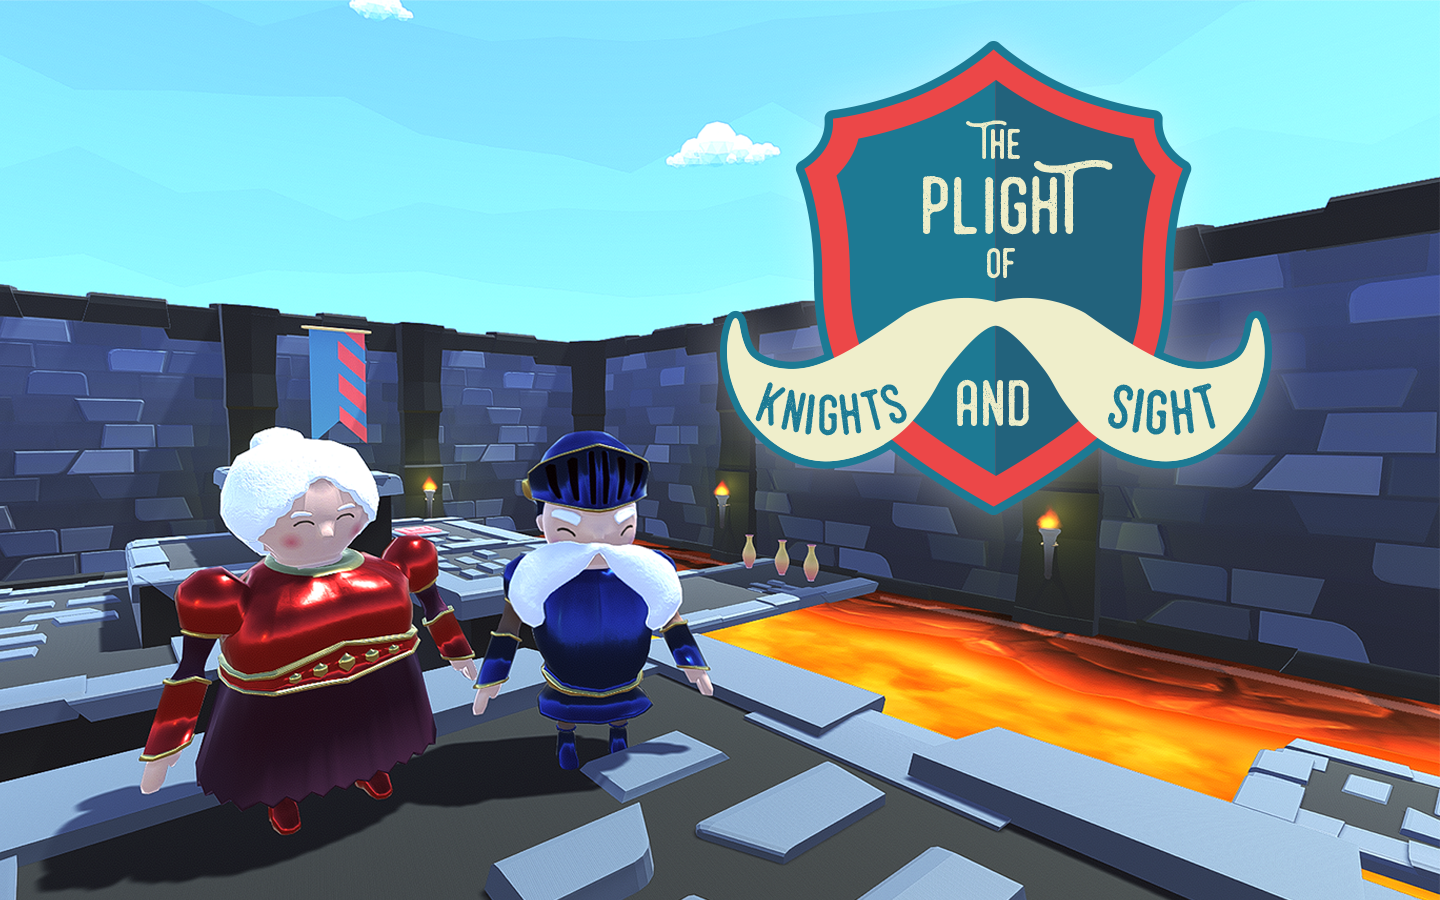 Ubisoft Game Lab Protoype: The Plight of Knights and Sight